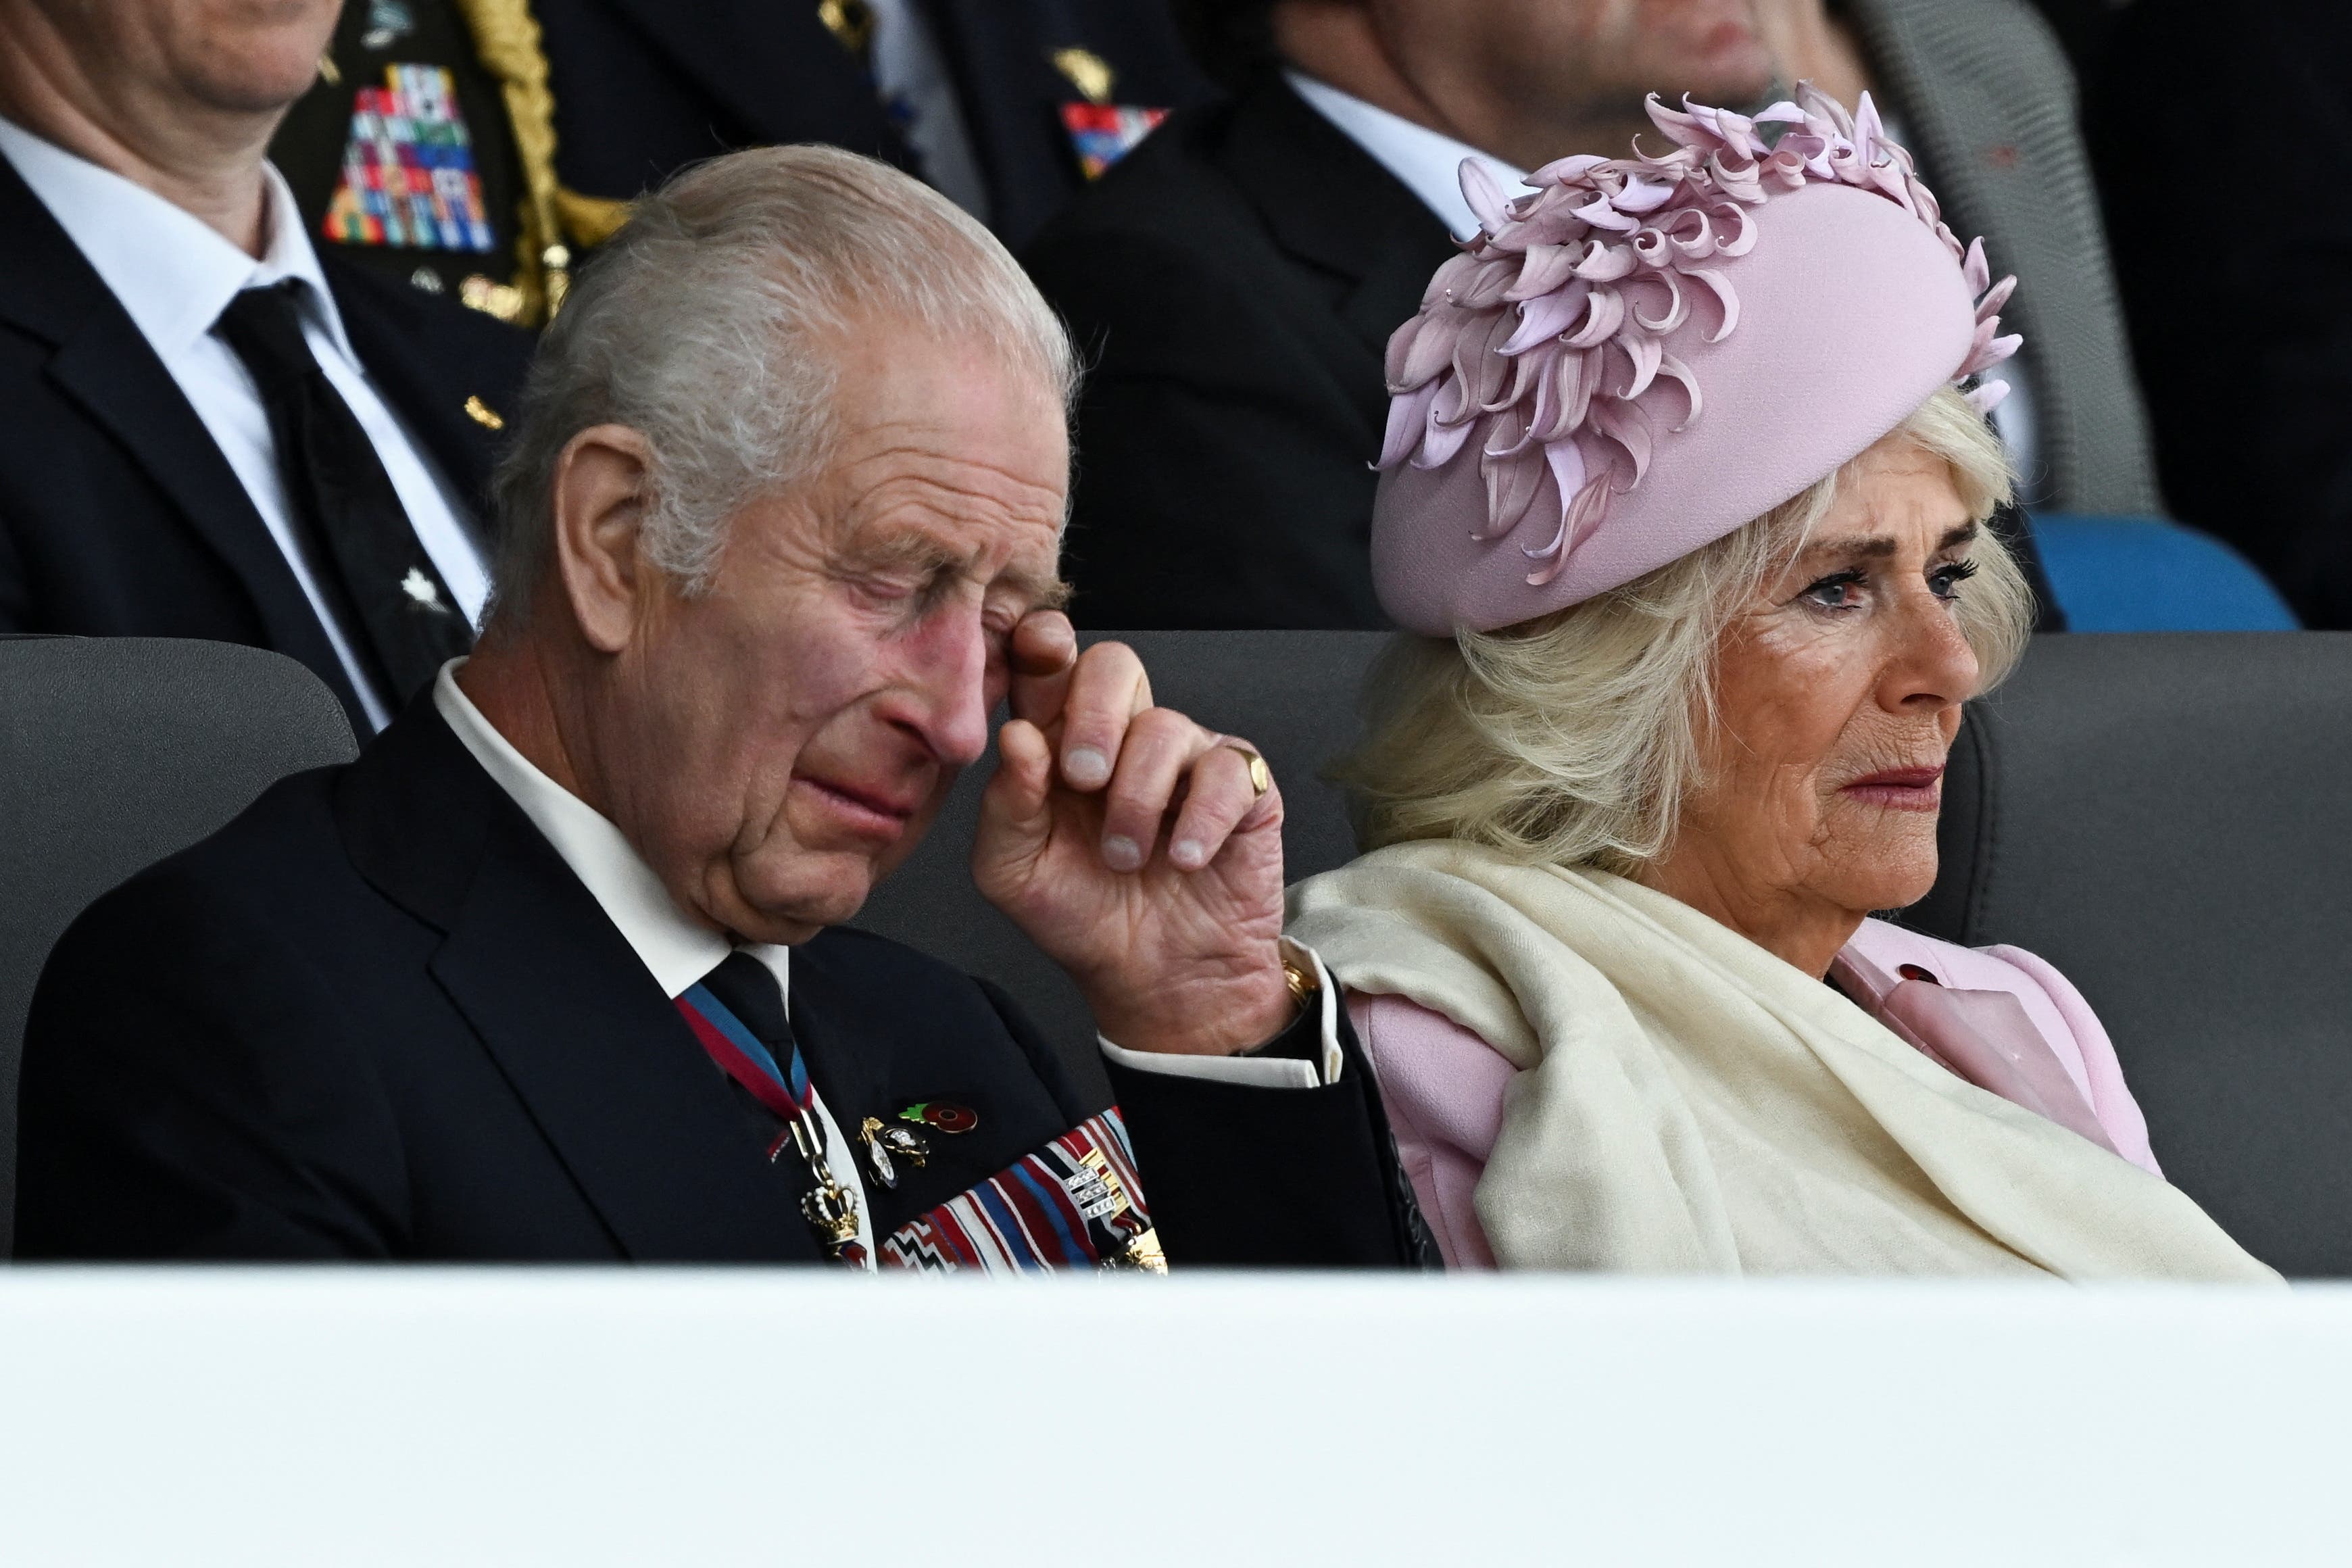 Charles also appeared to become emotional during the event